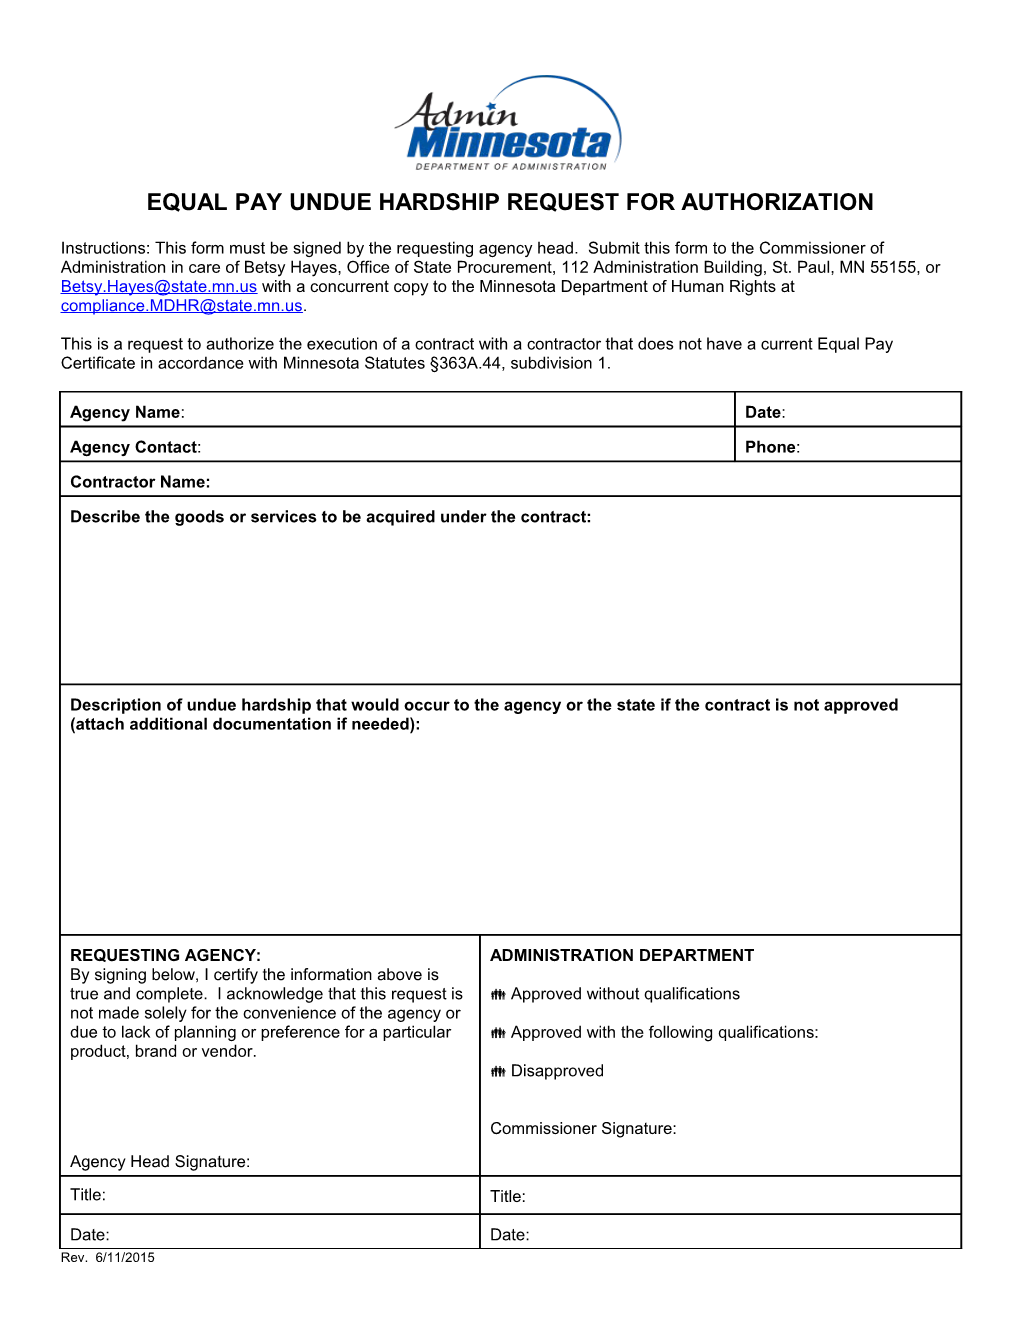 Equal Pay Undue Hardship Request for Authorization